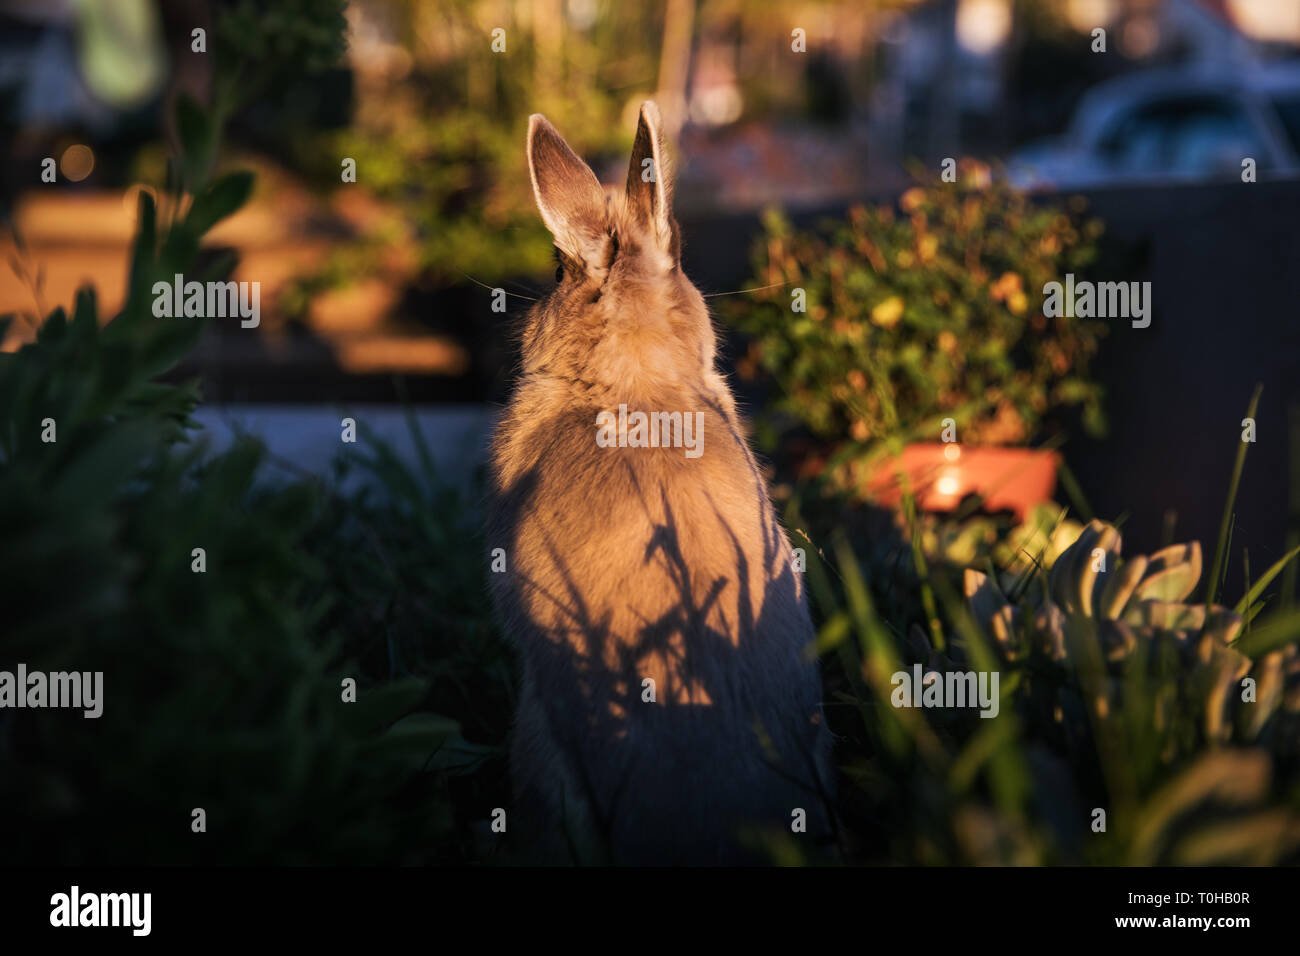 A dwarf bunny standing with its back to camera in a garden with ears upward. Stock Photo